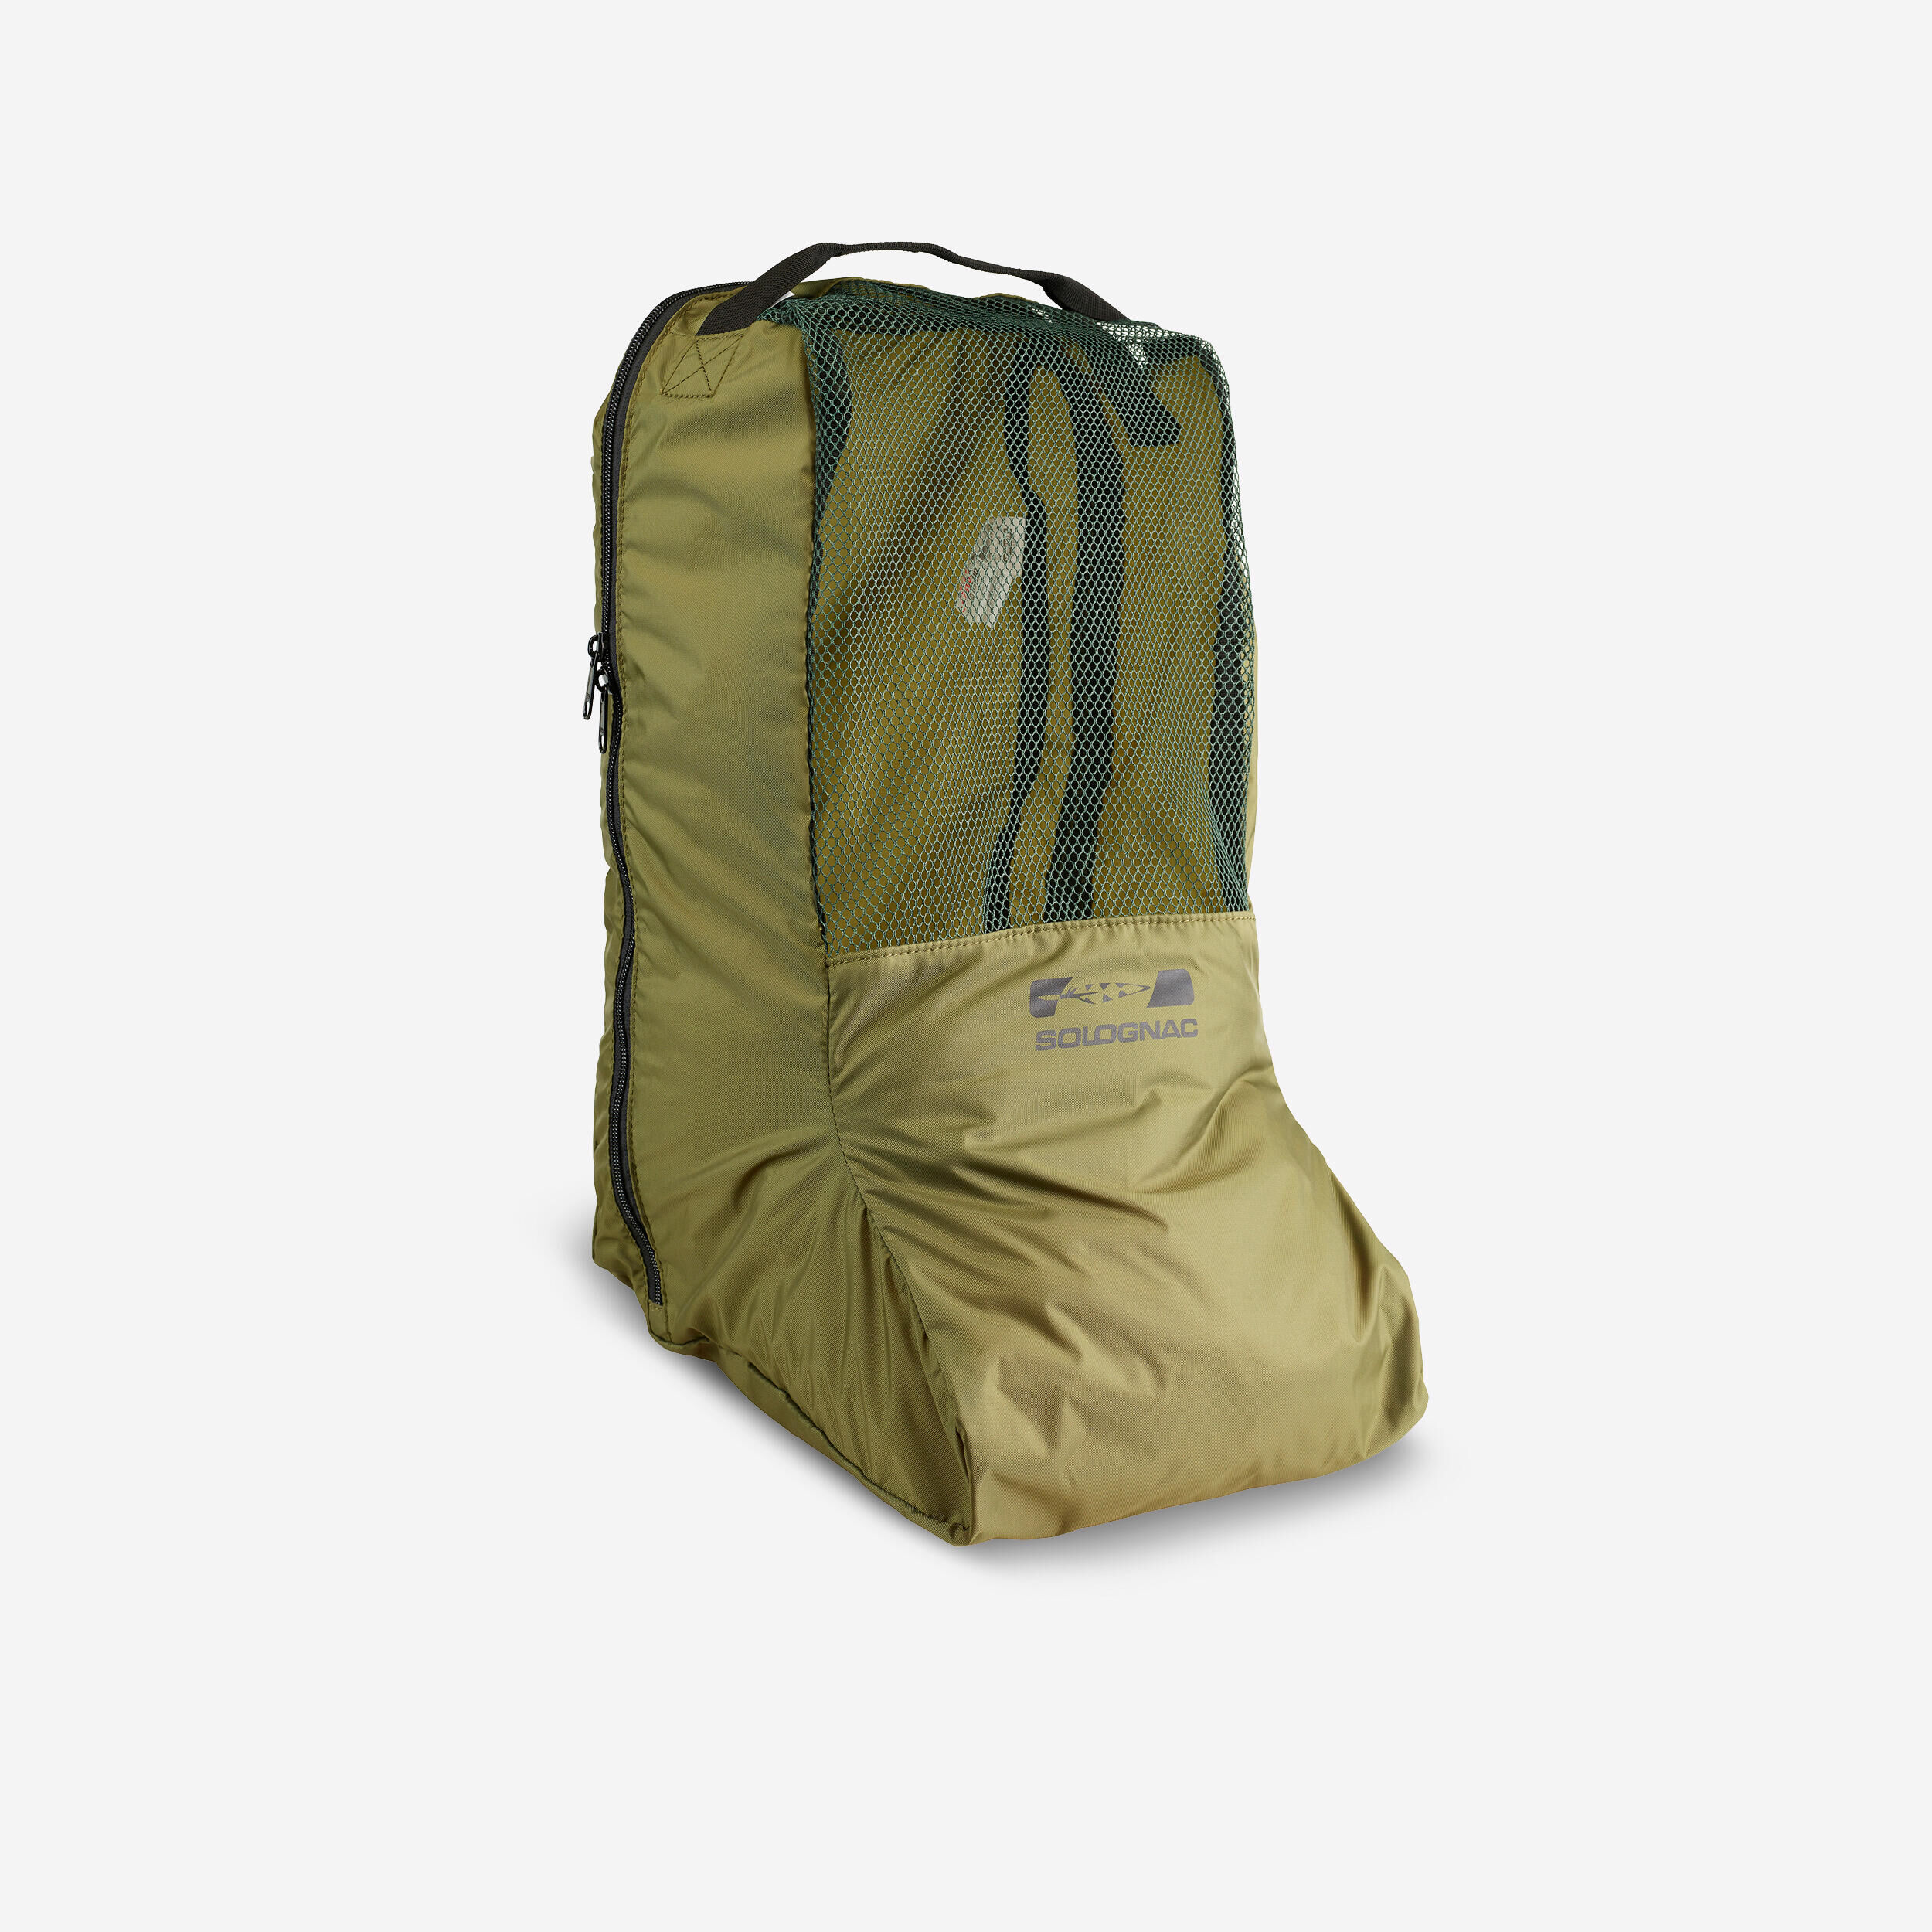 SOLOGNAC Quick-Drying Welly Boot Bag - Green